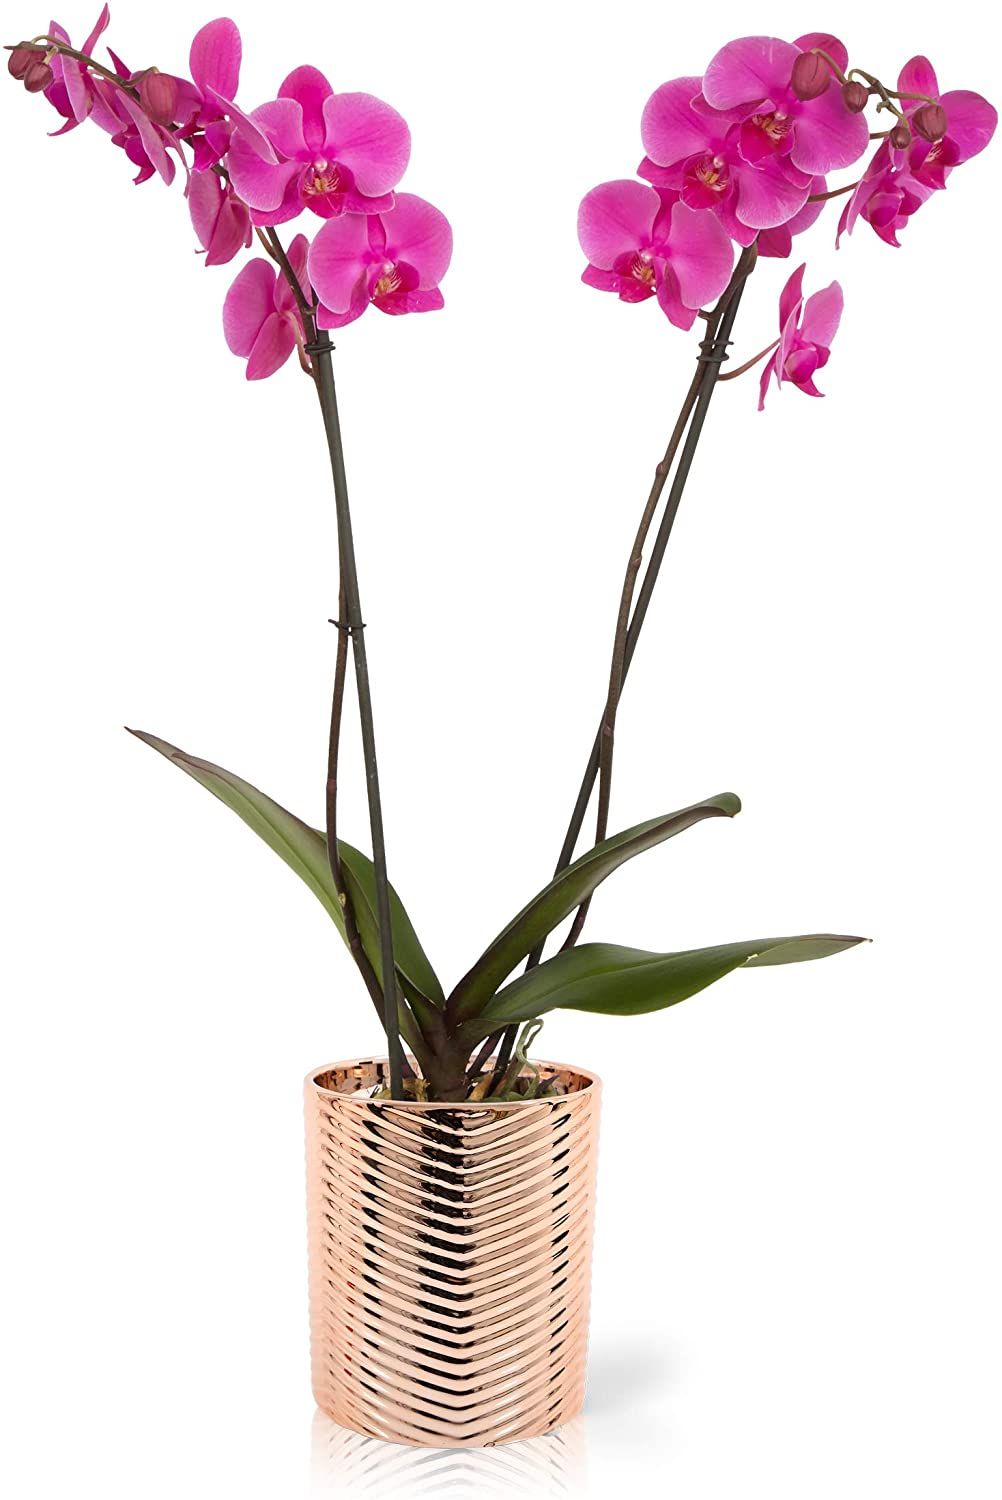 Color Orchids Live Blooming Double Stem - $$title$$